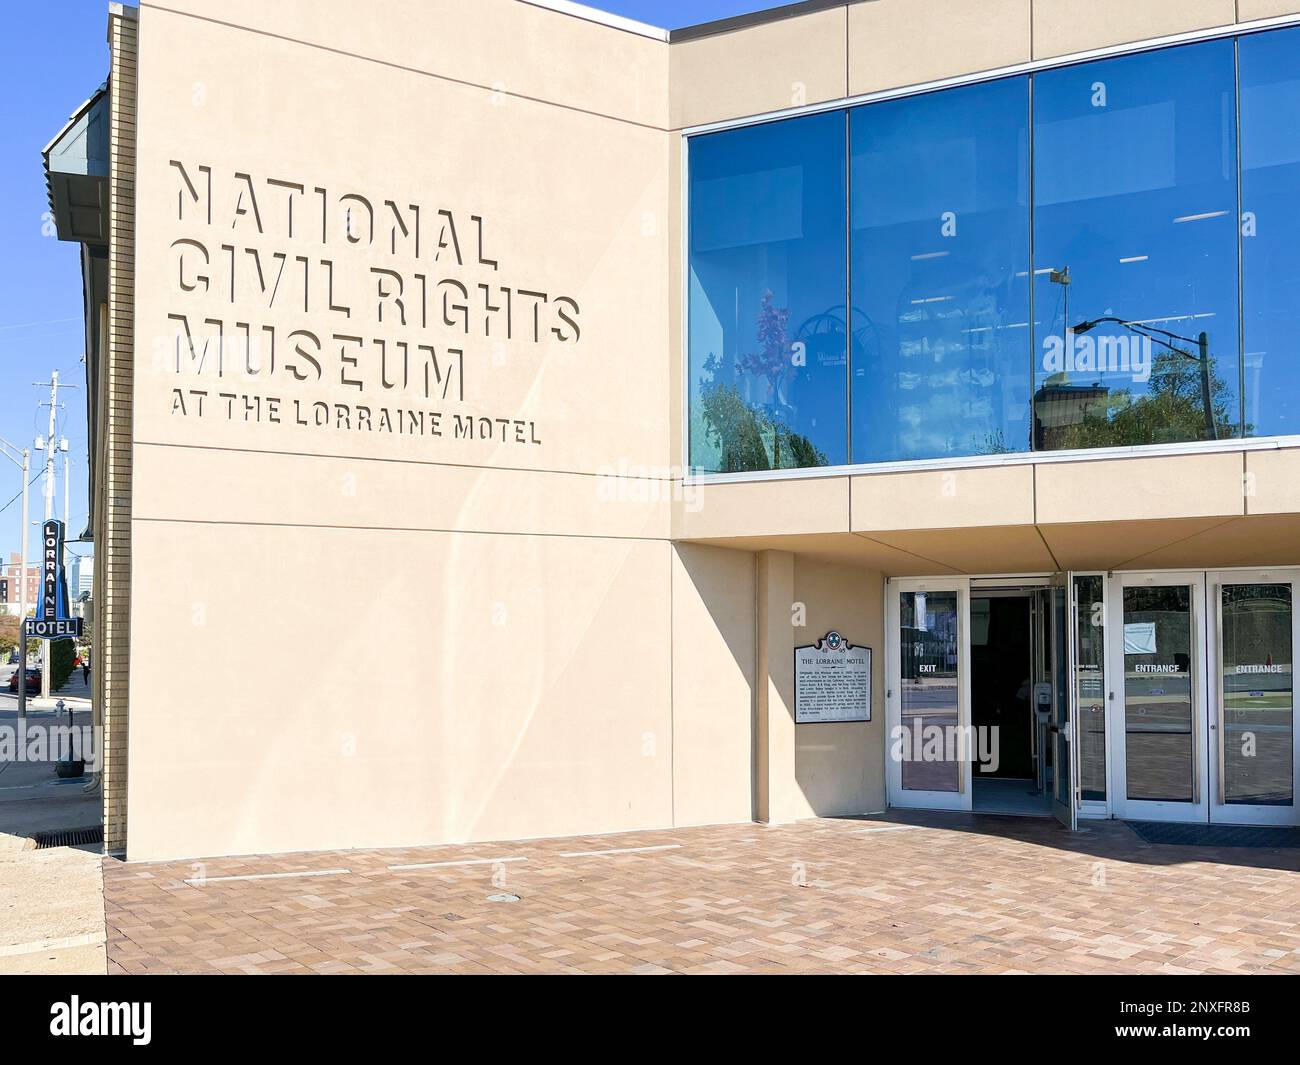 Exterior of the National Civil Rights Museum, Lorraine Motel, Memphis, Tennessee, showing entrance doors and signage engraved into stone facade. Stock Photo